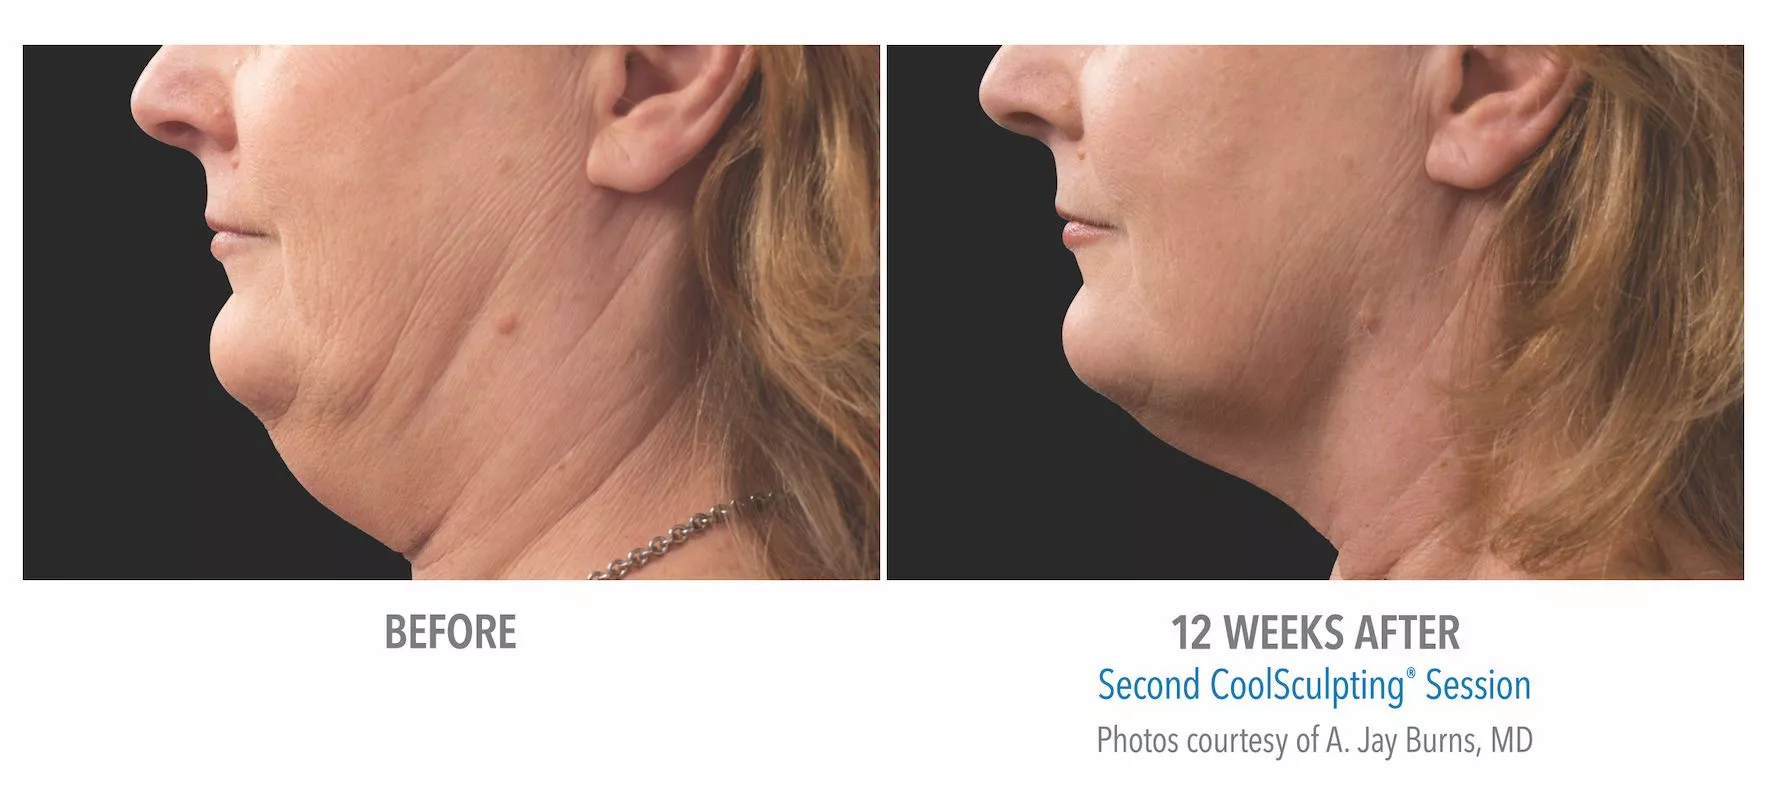 Female CoolSculpting patient in Summerlin. Before and after photo of chin / jawline 12 weeks post CoolSculpting treatment. Patient did not use Kybella.